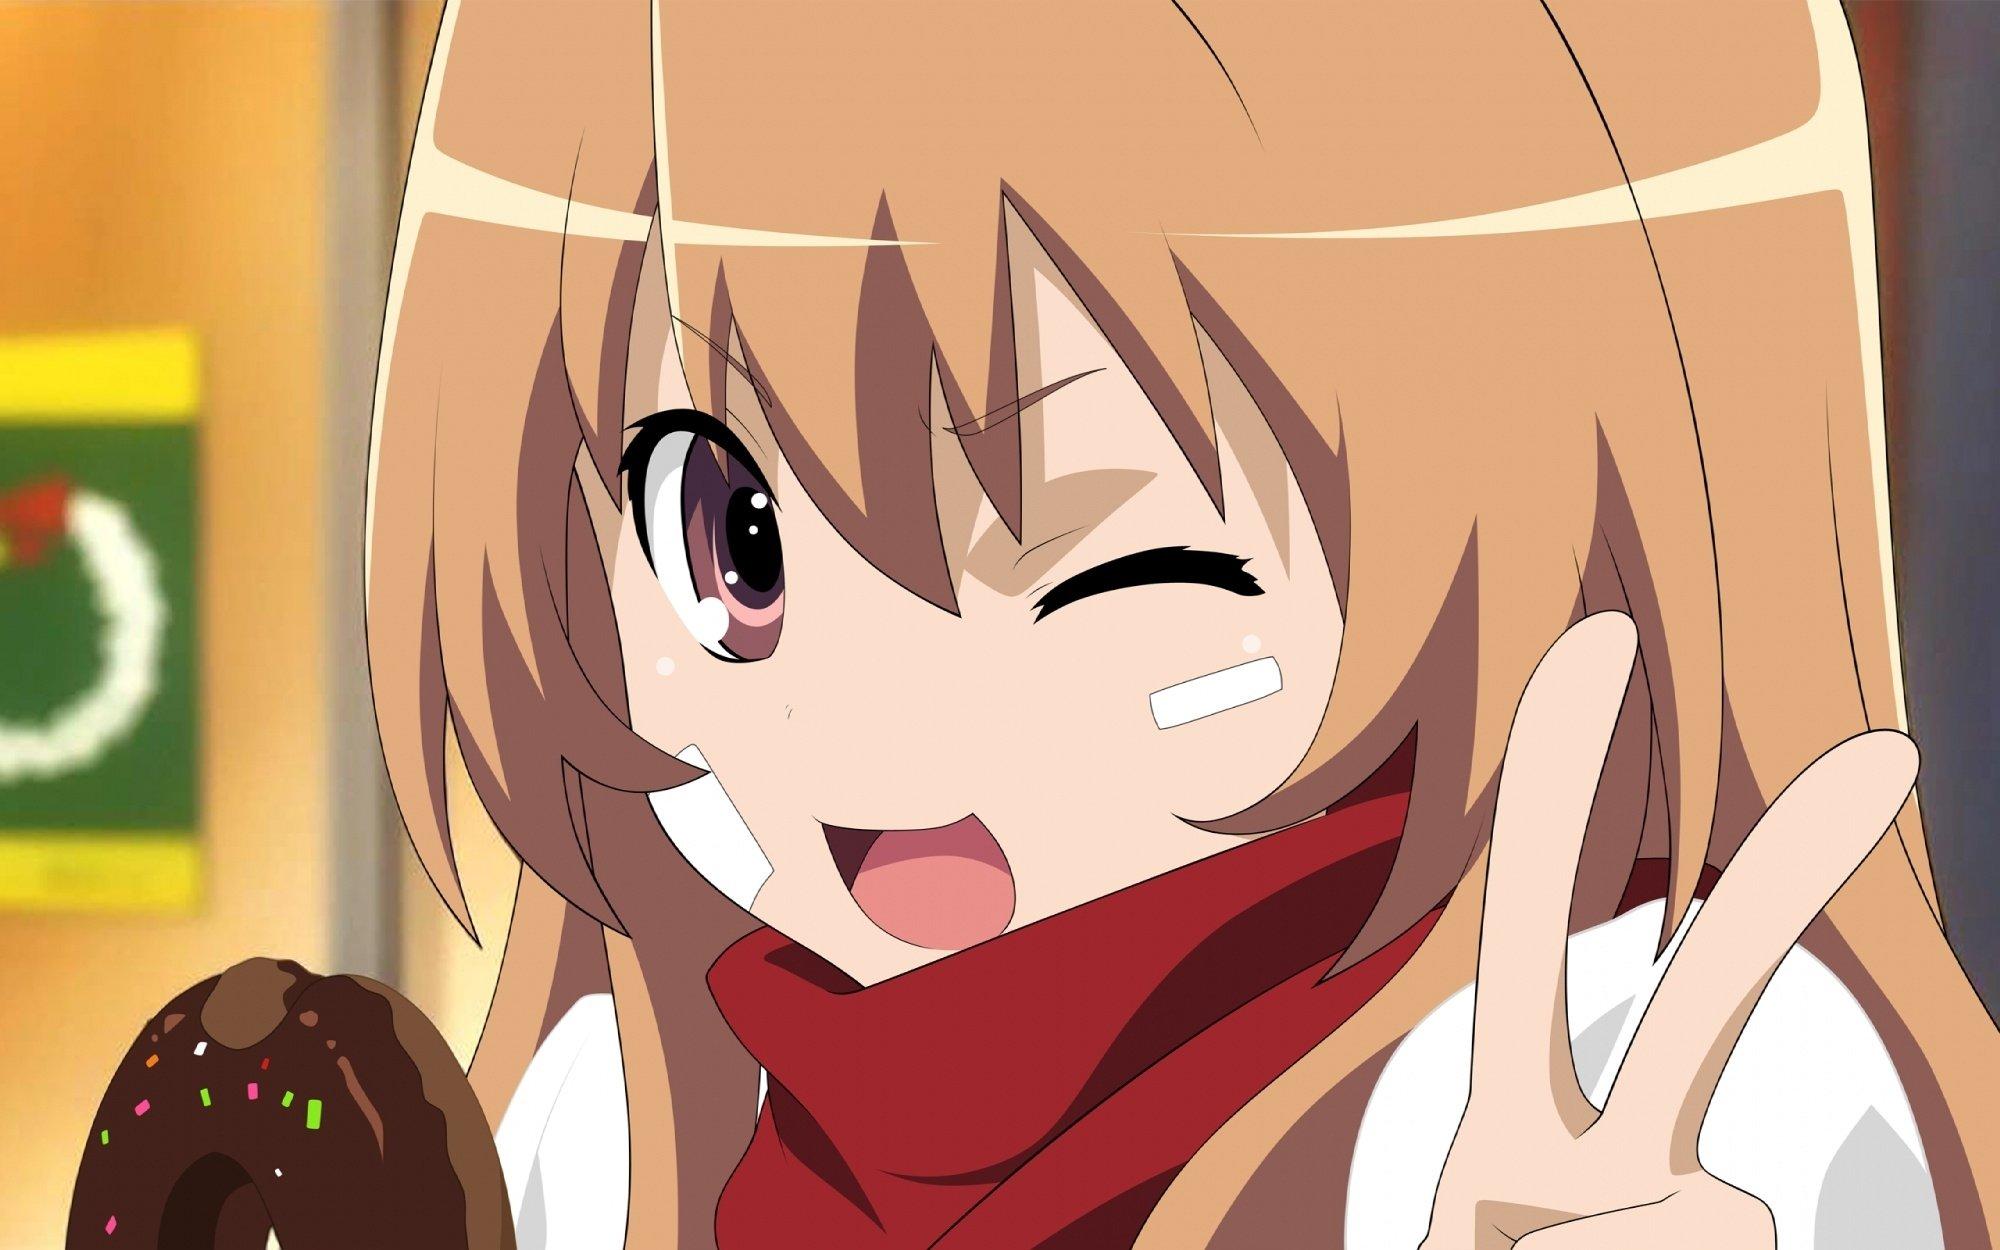 Give Me Your Taiga Toradora! Wallpaper! I'm In Need